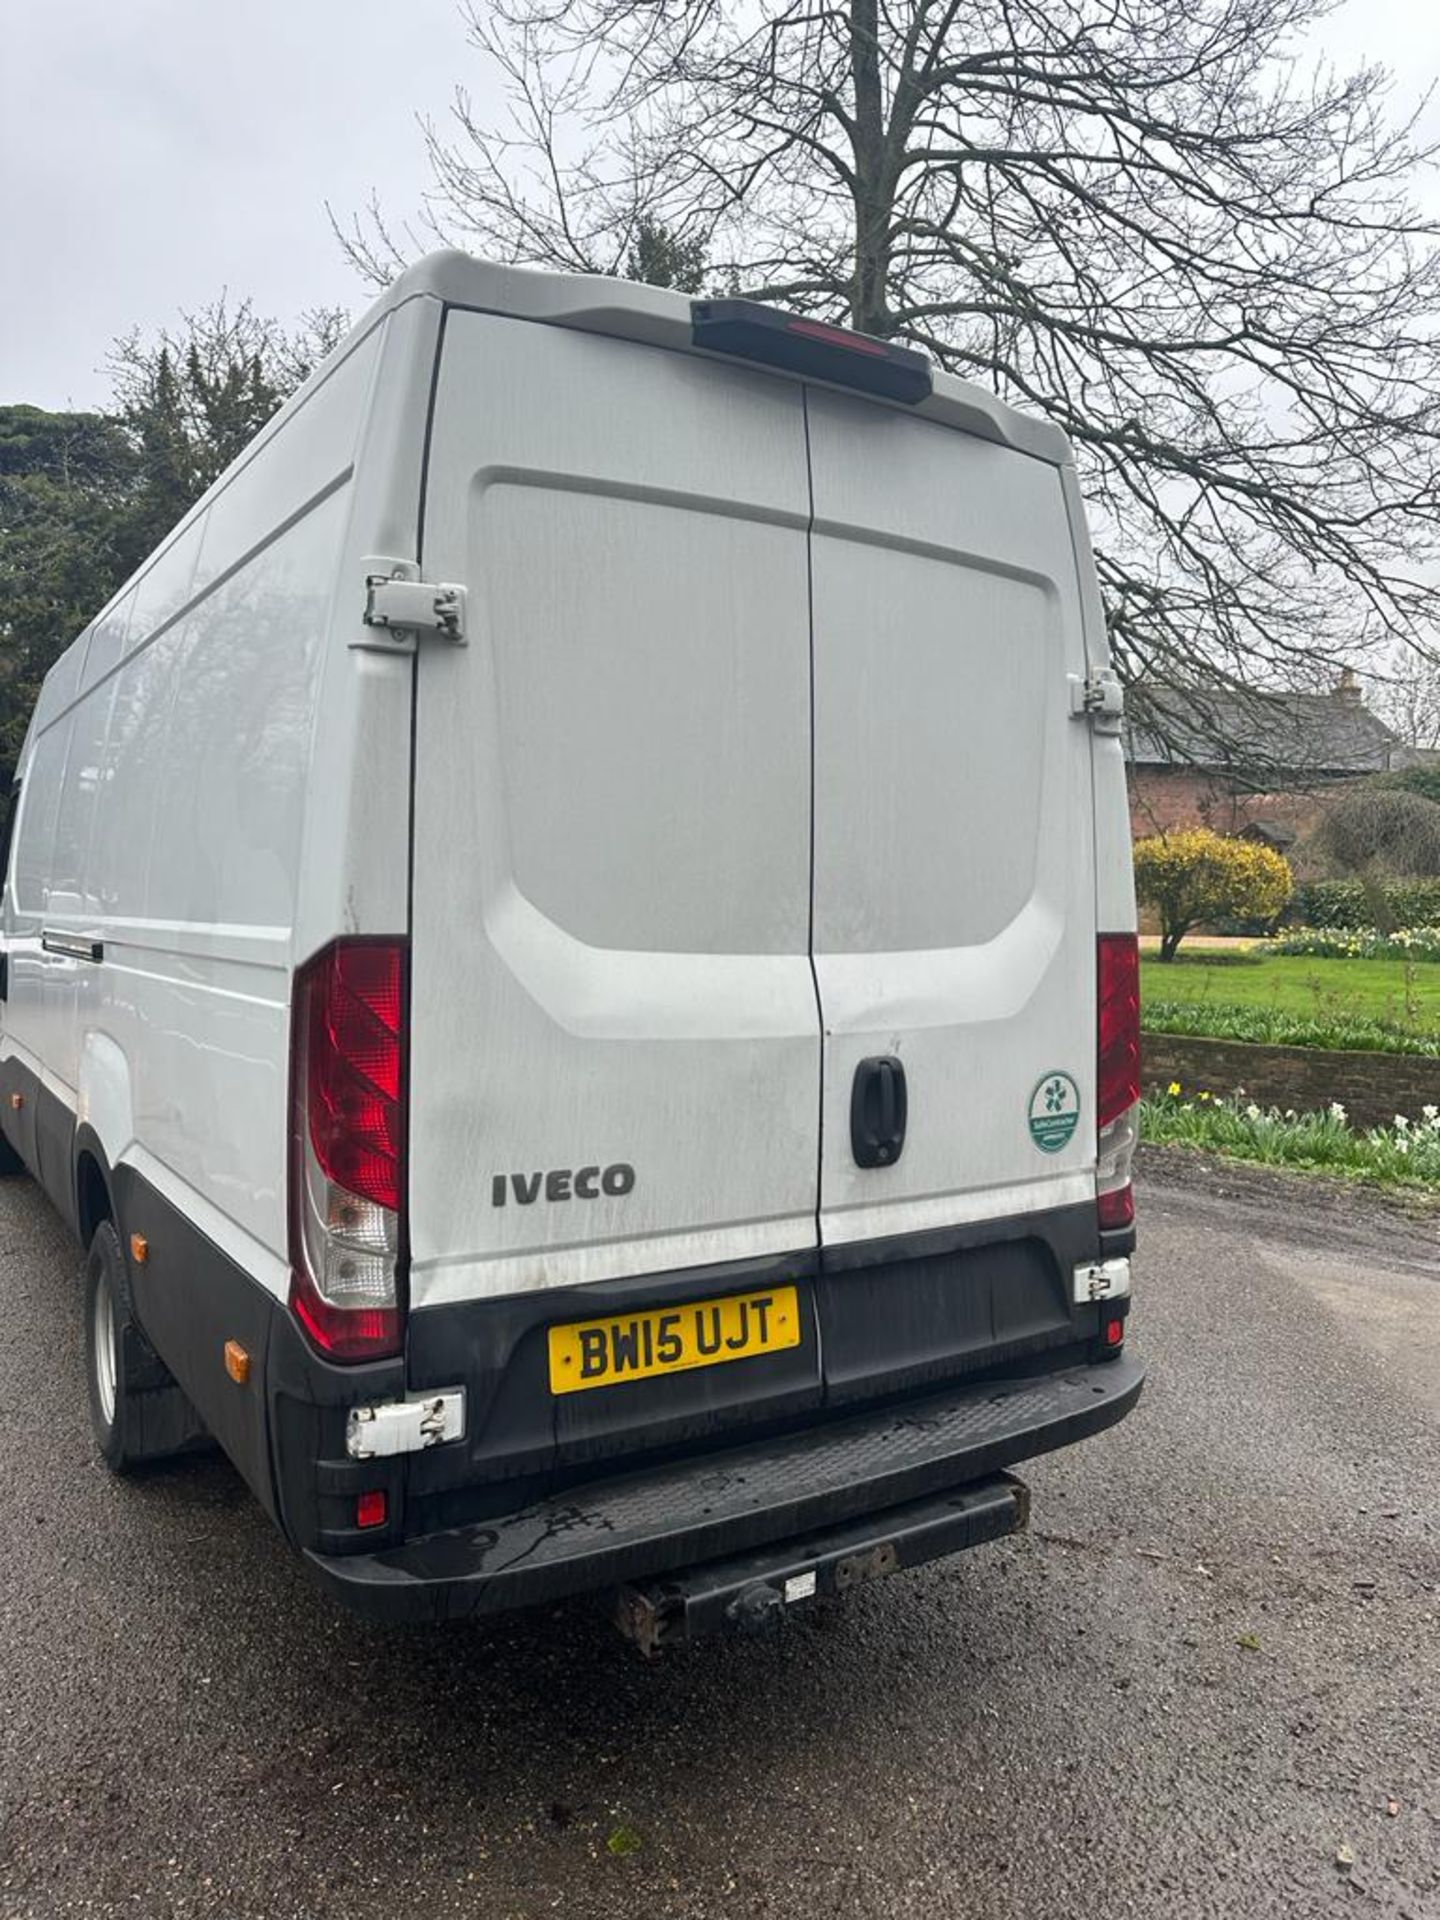 2015 15 REG FORD IVECO DAILY 35C17 VAN  - Image 7 of 15